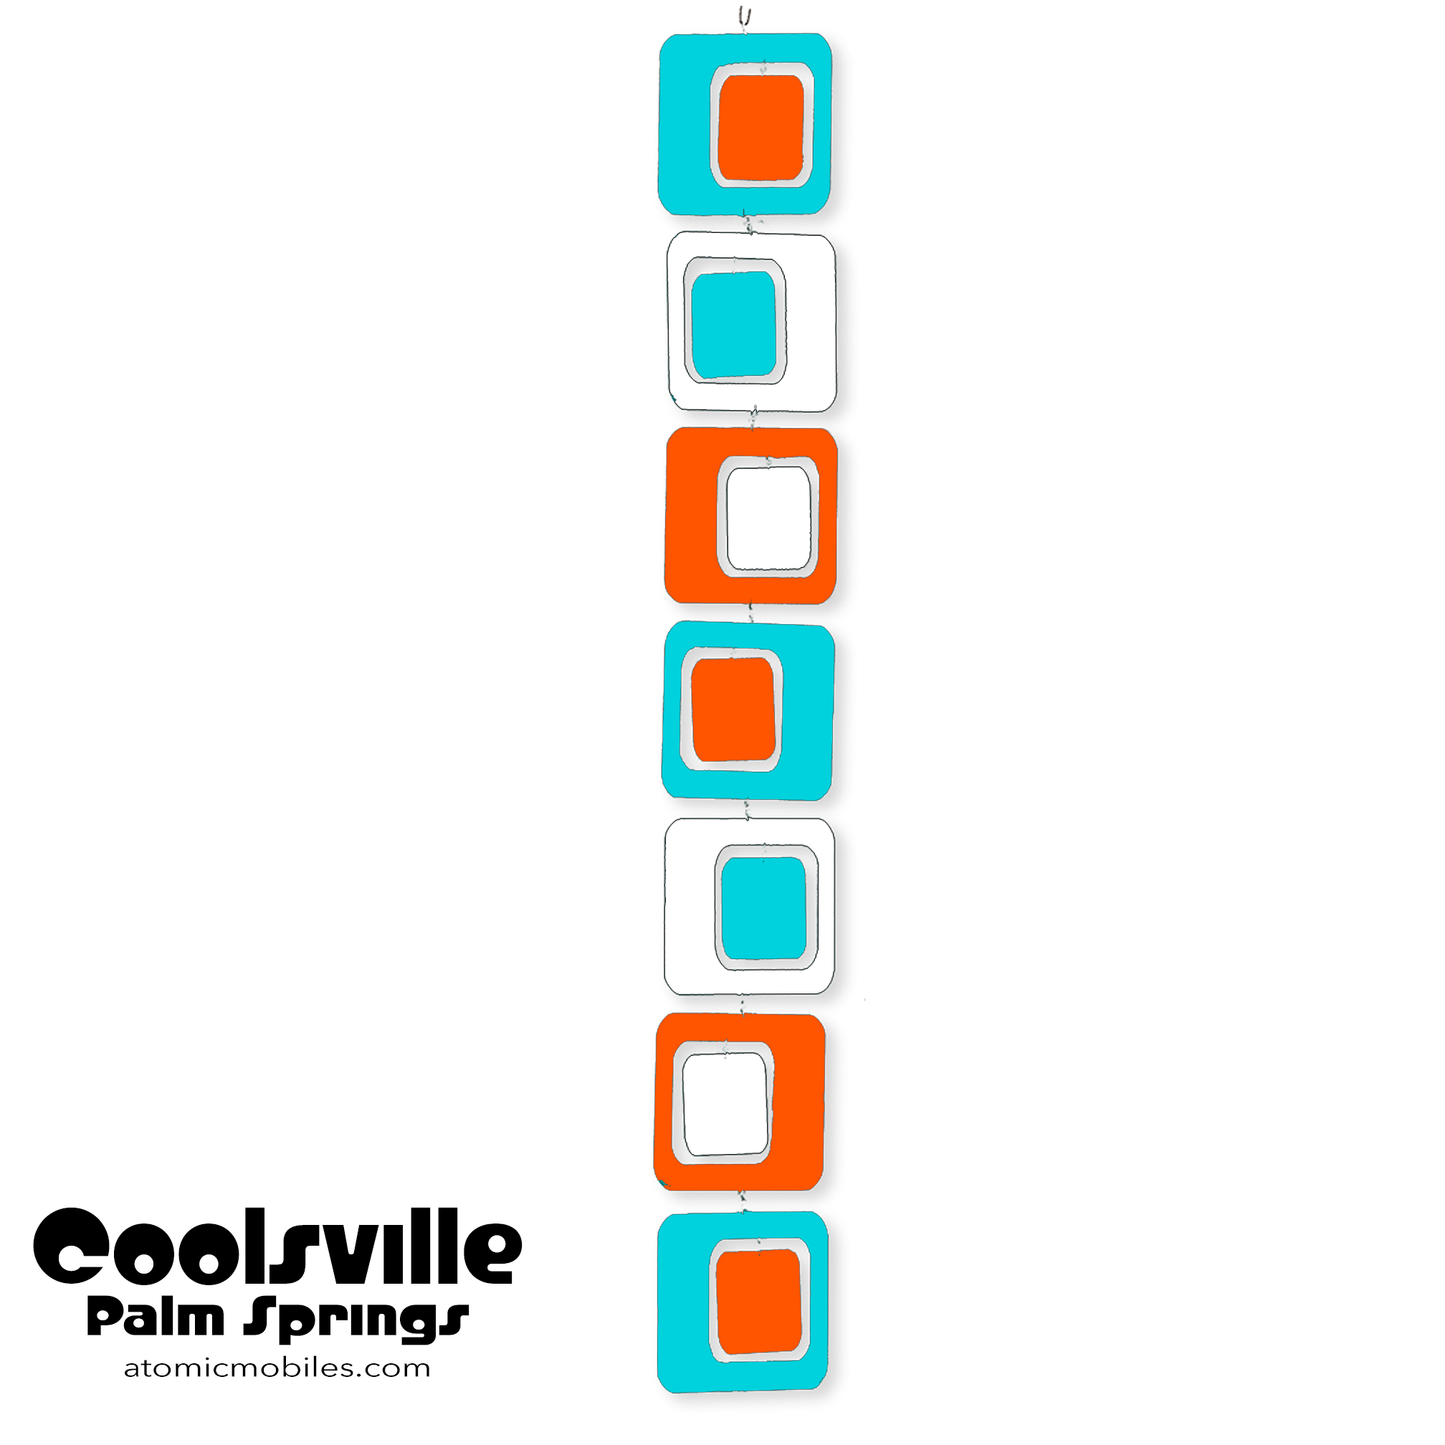 Coolsville kinetic vertical hanging art mobile in mid century modern colors of Aqua Blue, Orange, and White by AtomicMobiles.com